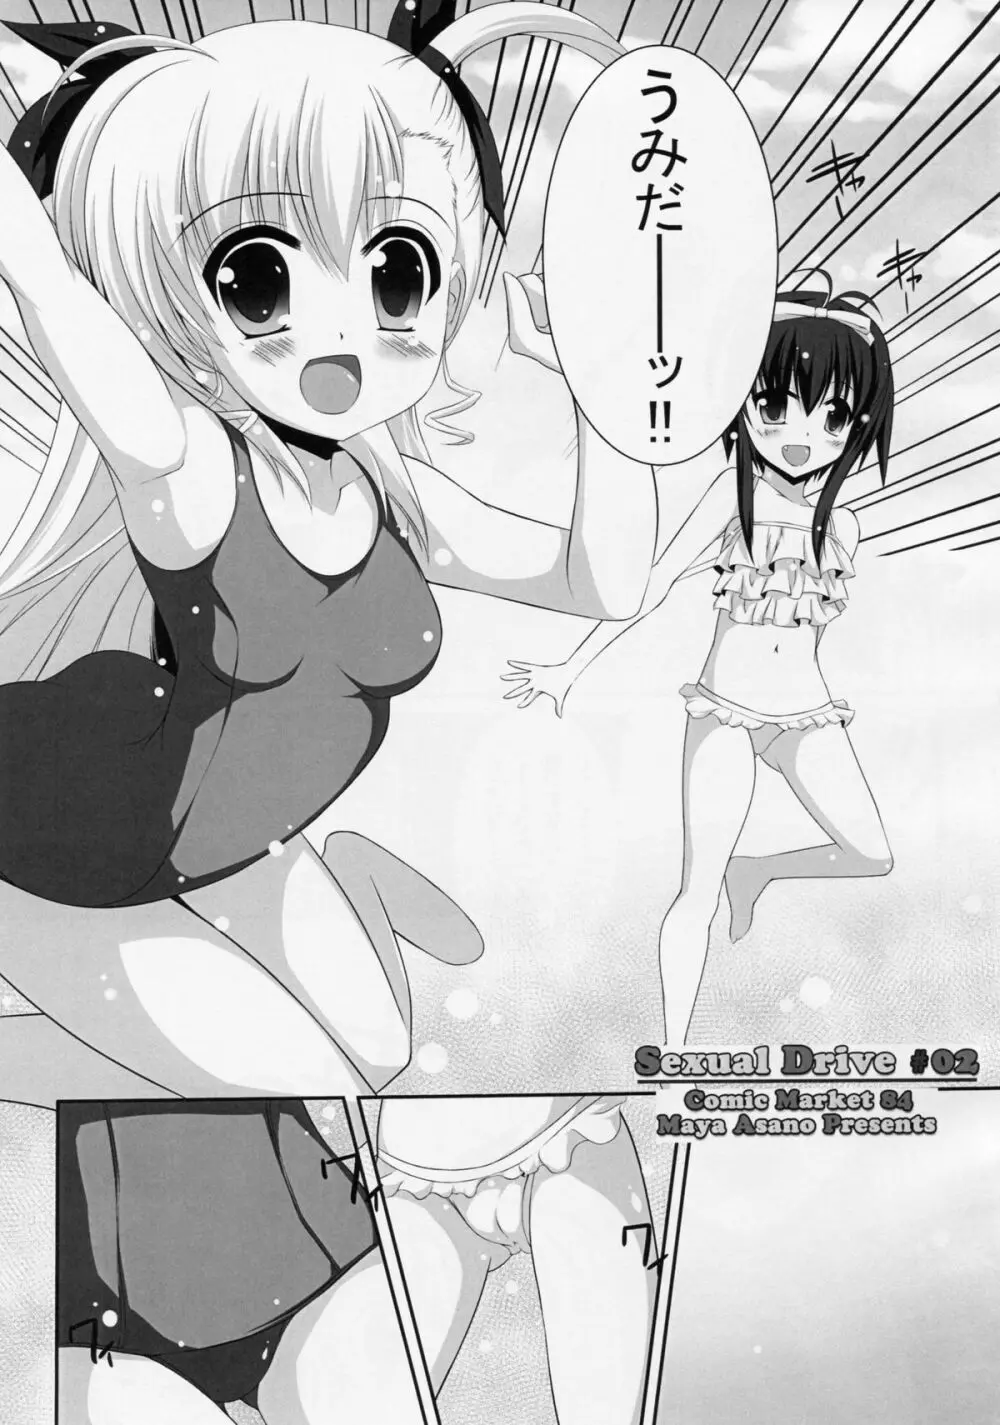 Sexual Drive #02 Page.6